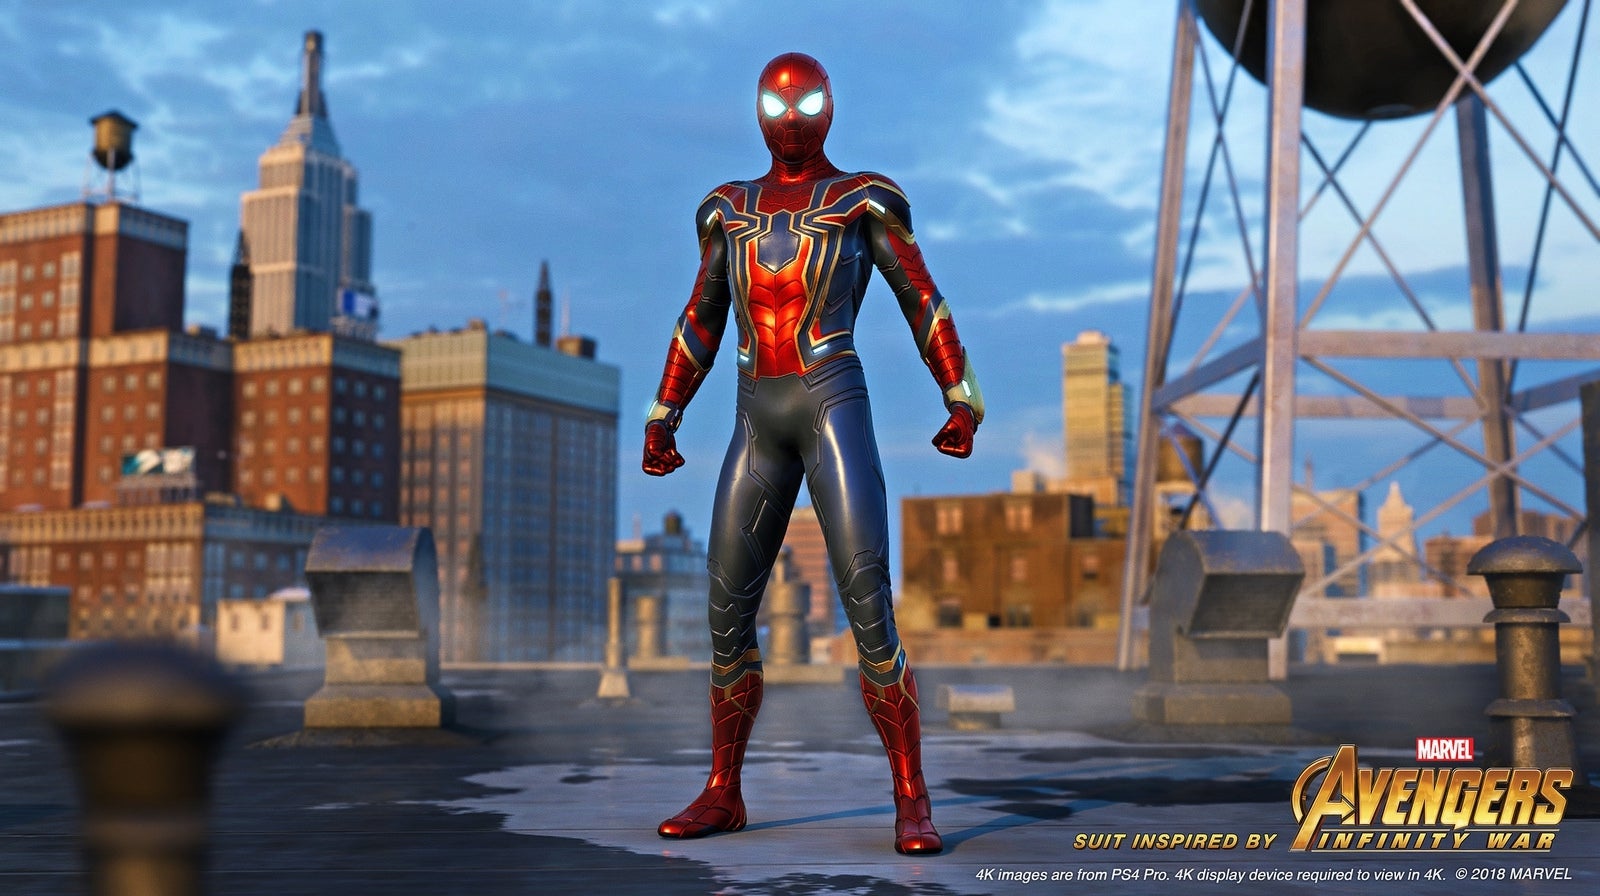 Spider-Man PS4 gets the cool Iron Spider suit from Avengers: Infinity War |  